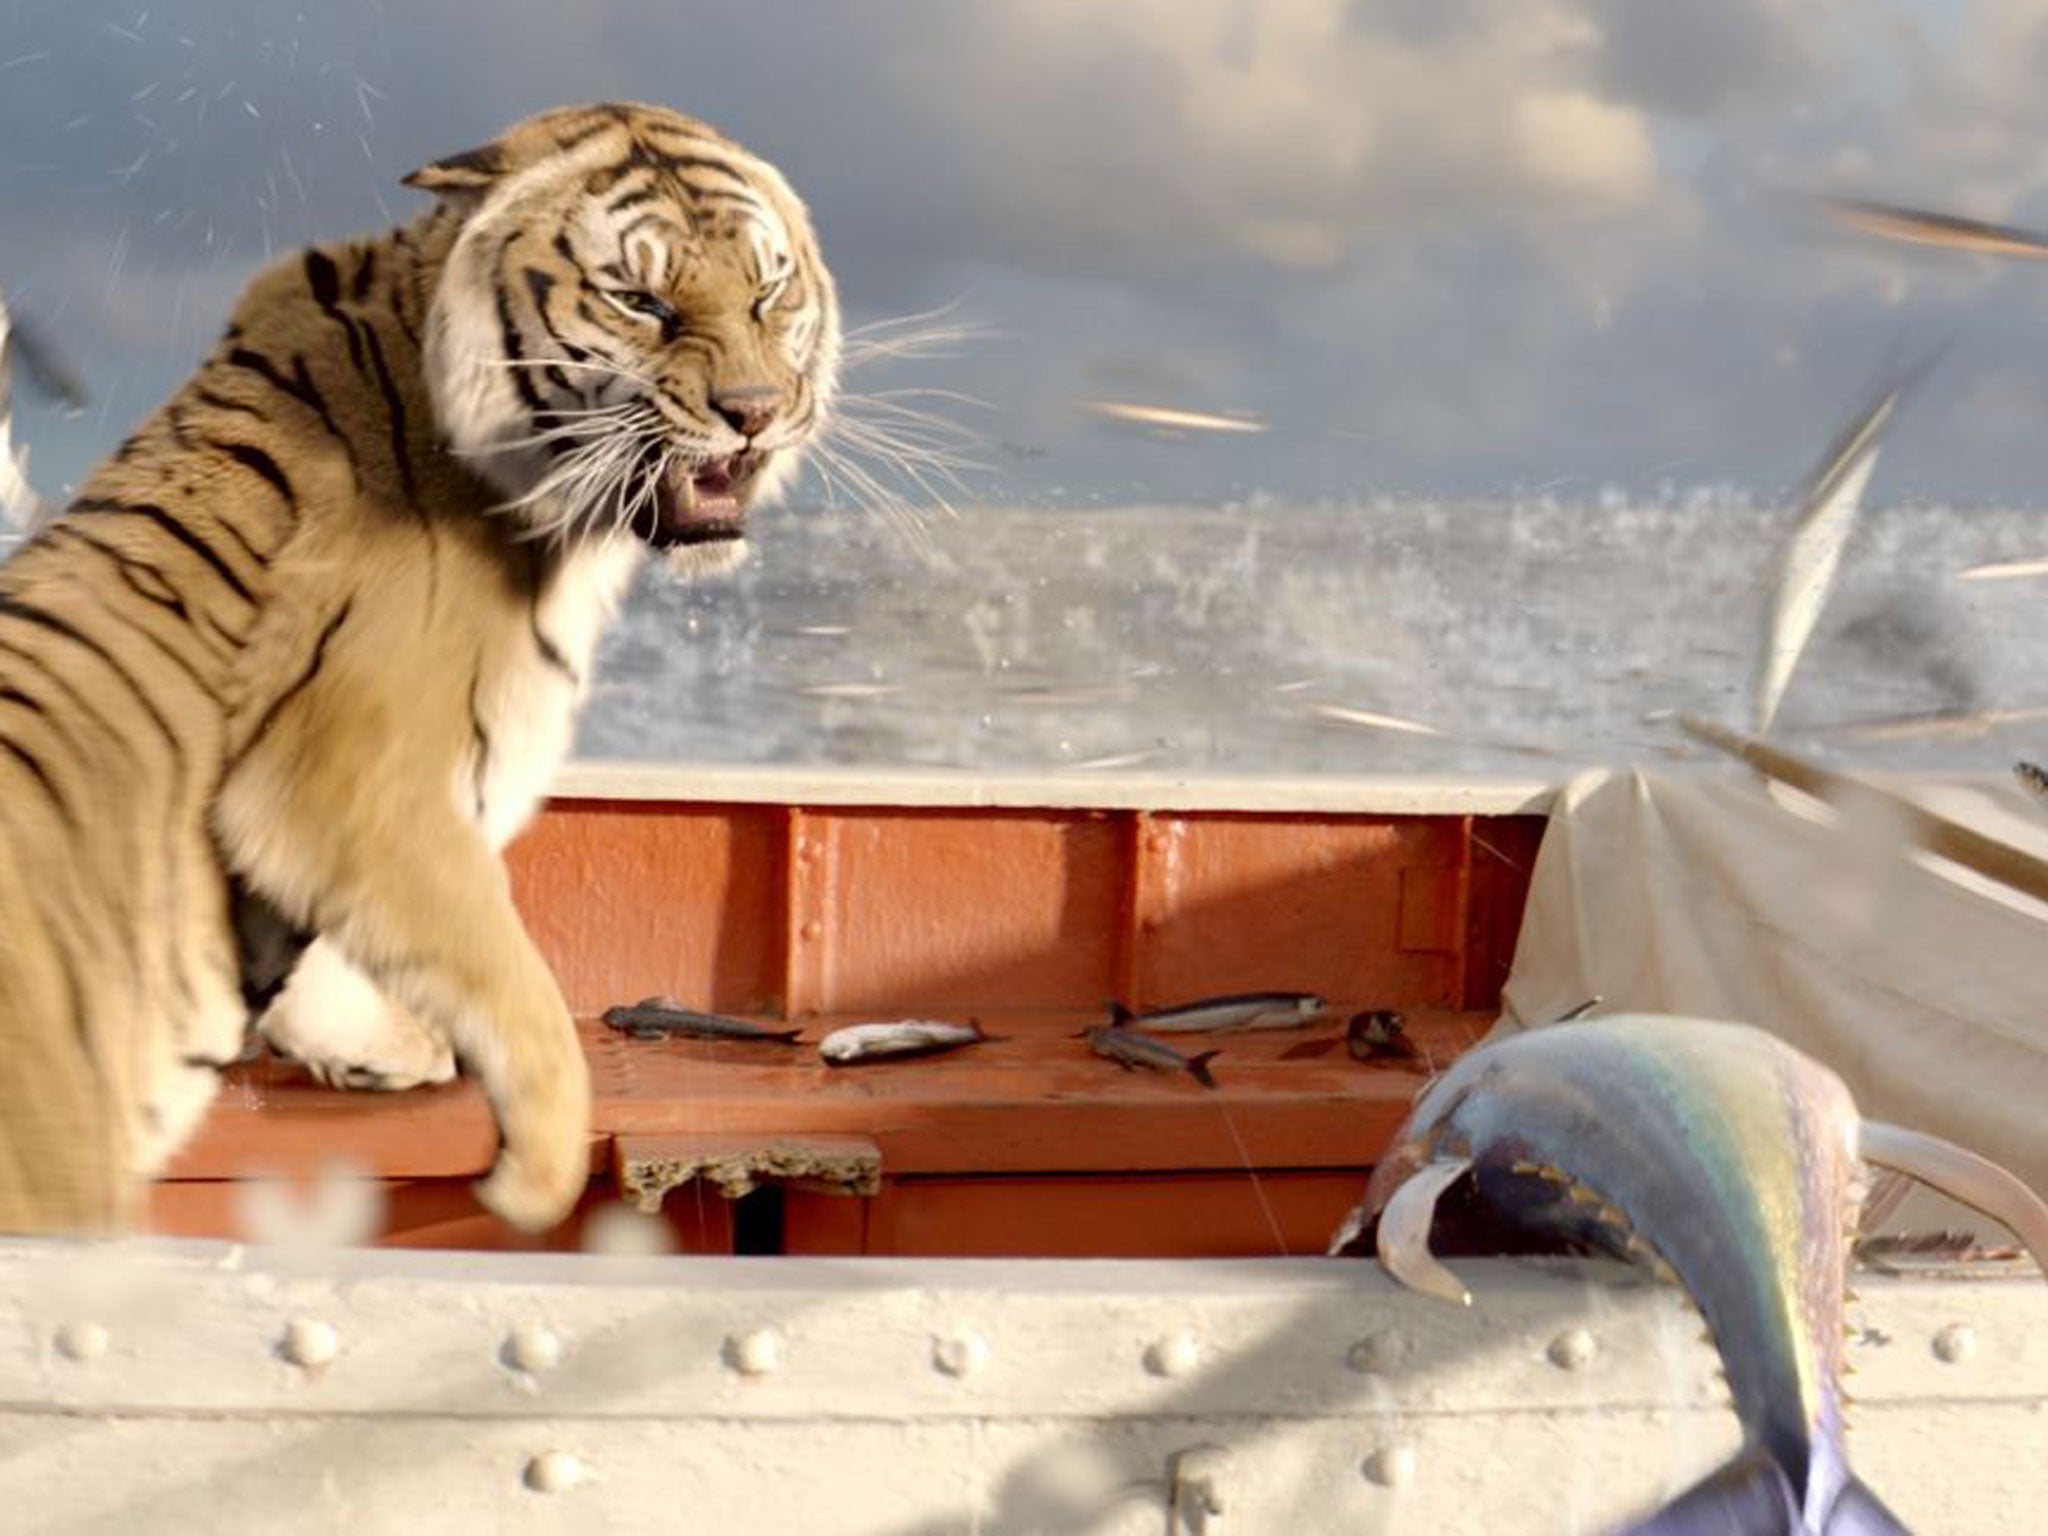 Richard Parker, CGI tiger from Life of Pi, should win Best Performance by an Animal at the Oscars. If the award existed